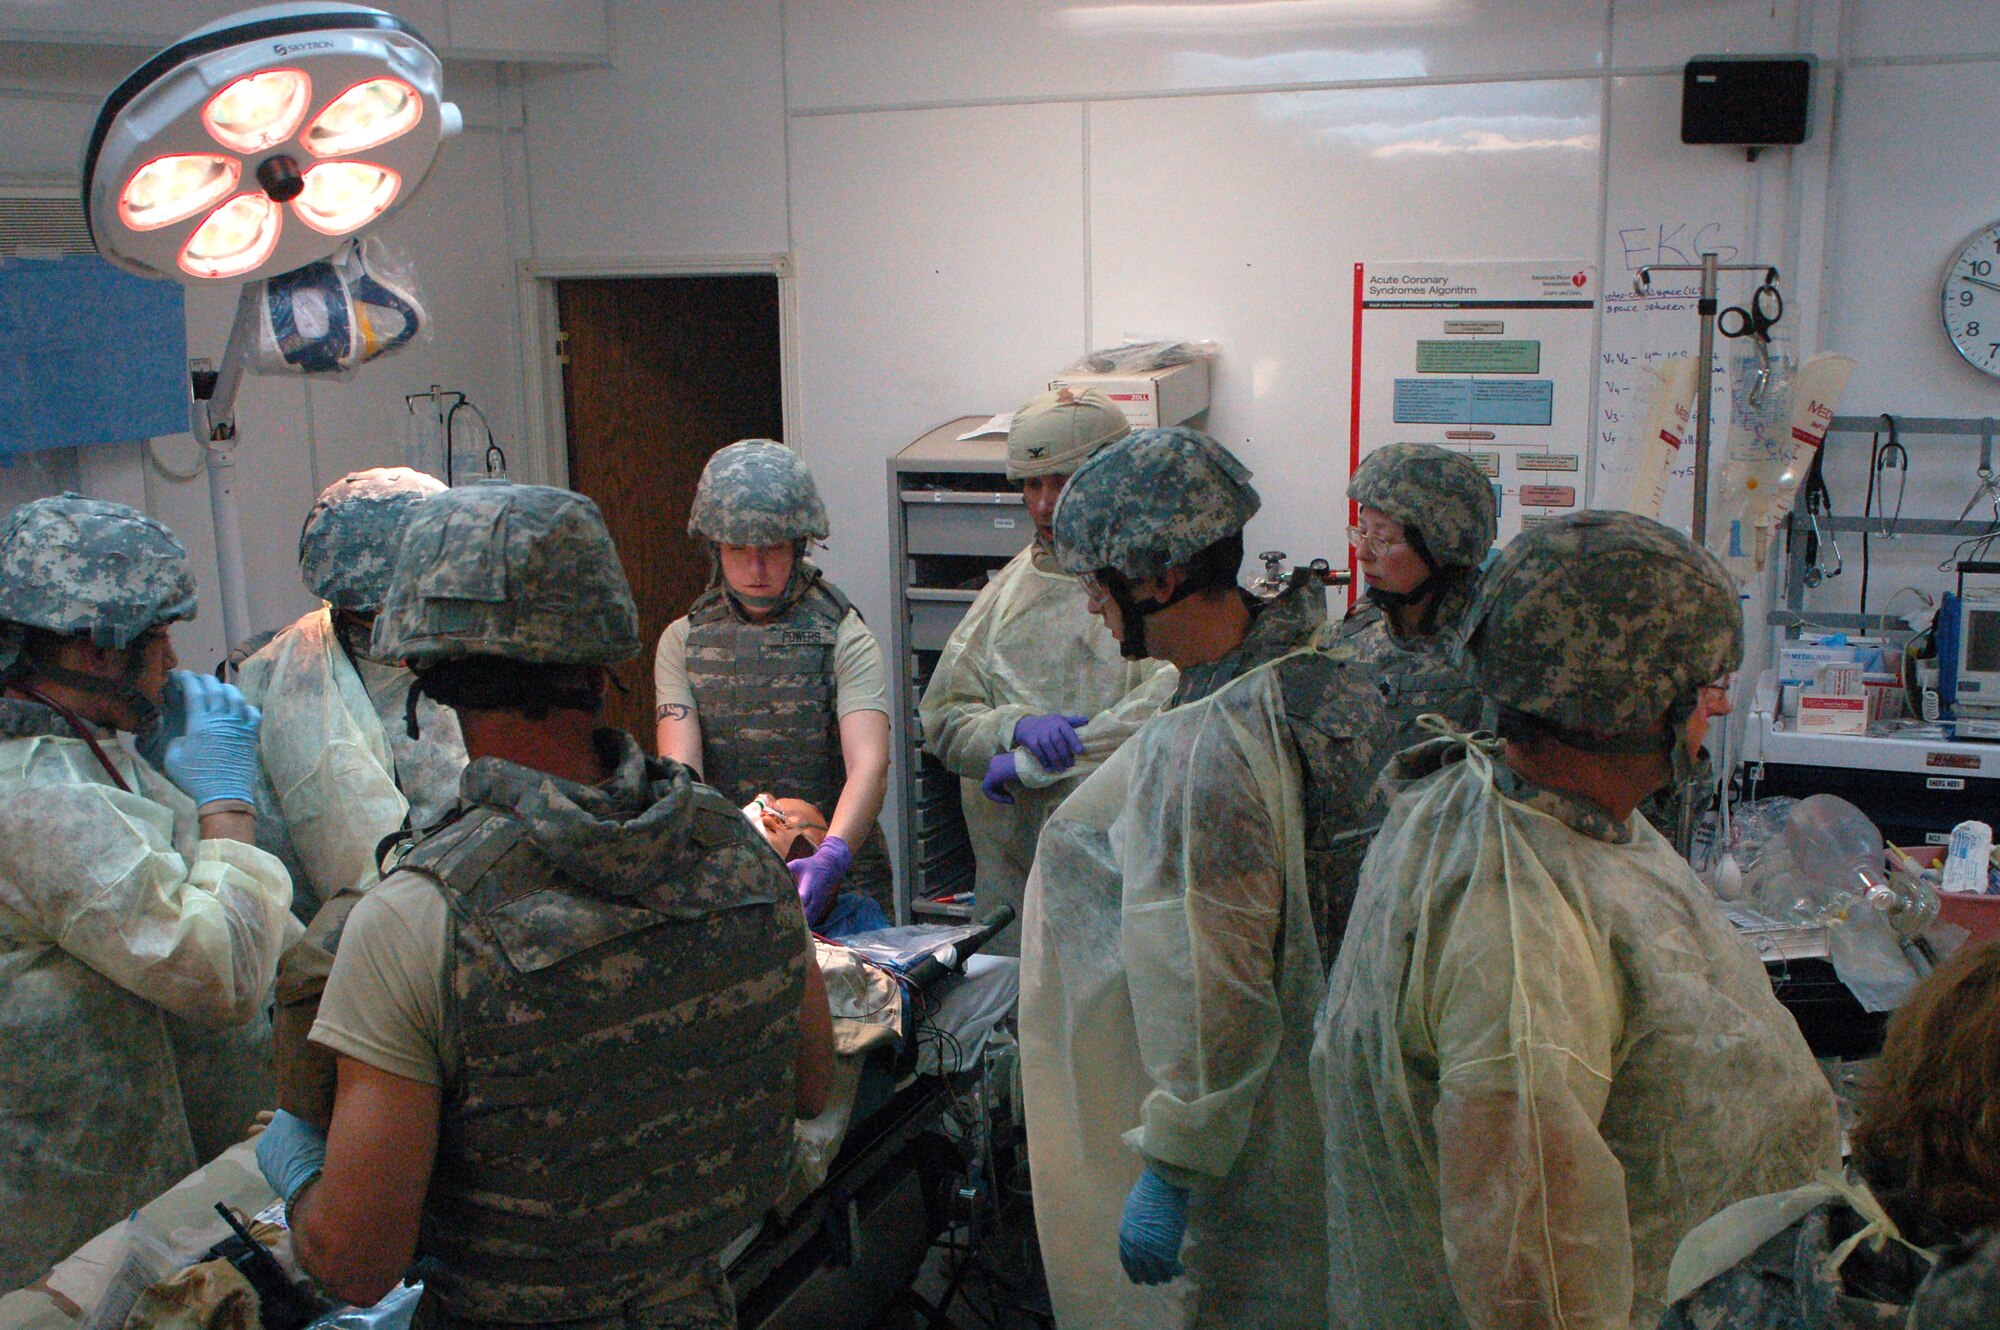 The 447th Expeditionary Medical Squadron at Sather Air Base, Iraq, is made up of only five doctors, one nurse and six medics. However, with the training the non-clinical squadron members recieved March 21, most of them are now able to assist in trauma care, which helps the core medical personnel during an emergency. (U.S. Air Force photo/Tech. Sgt. Amanda Callahan) 